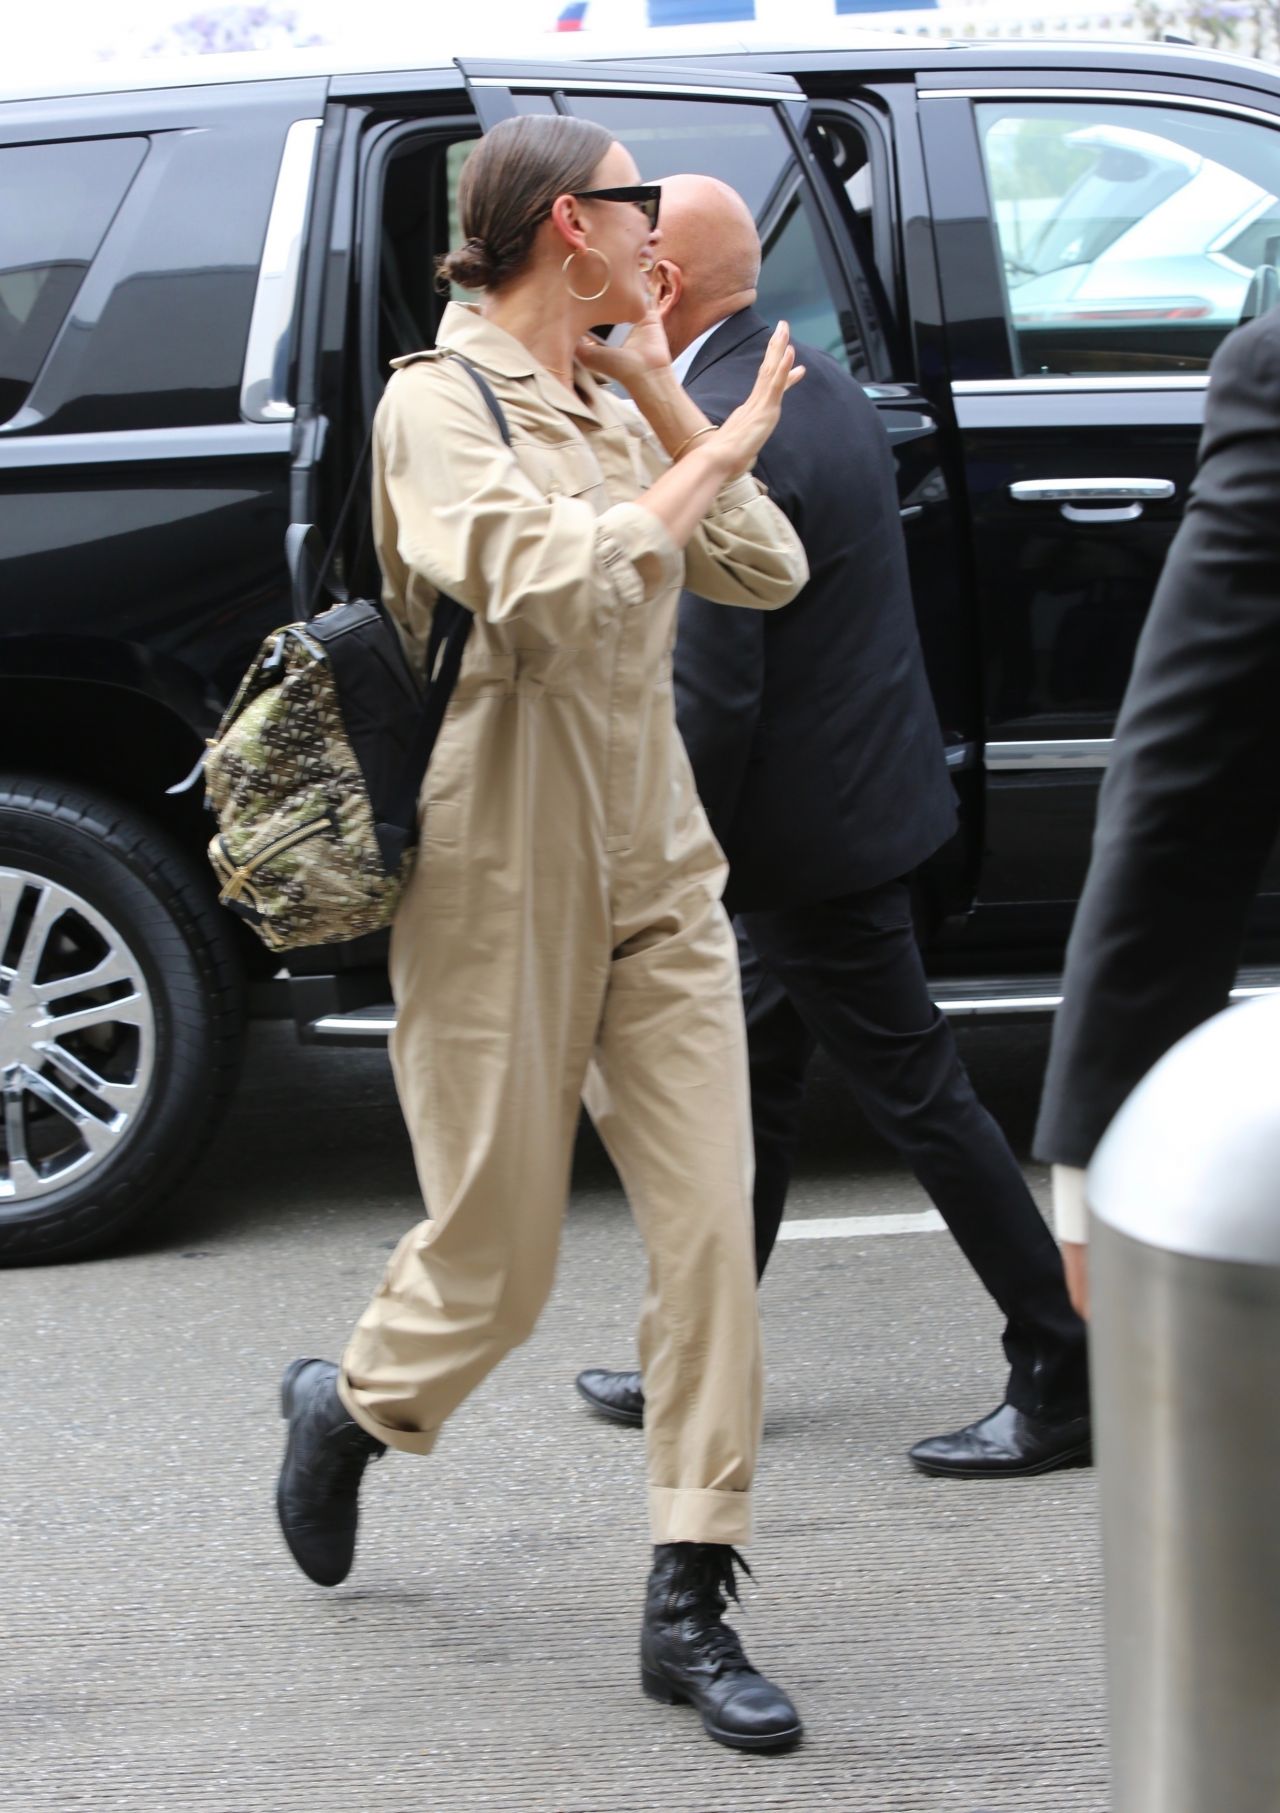 irina-shayk-in-comfy-travel-outfit-lax-in-la-06-06-2019-3.jpg